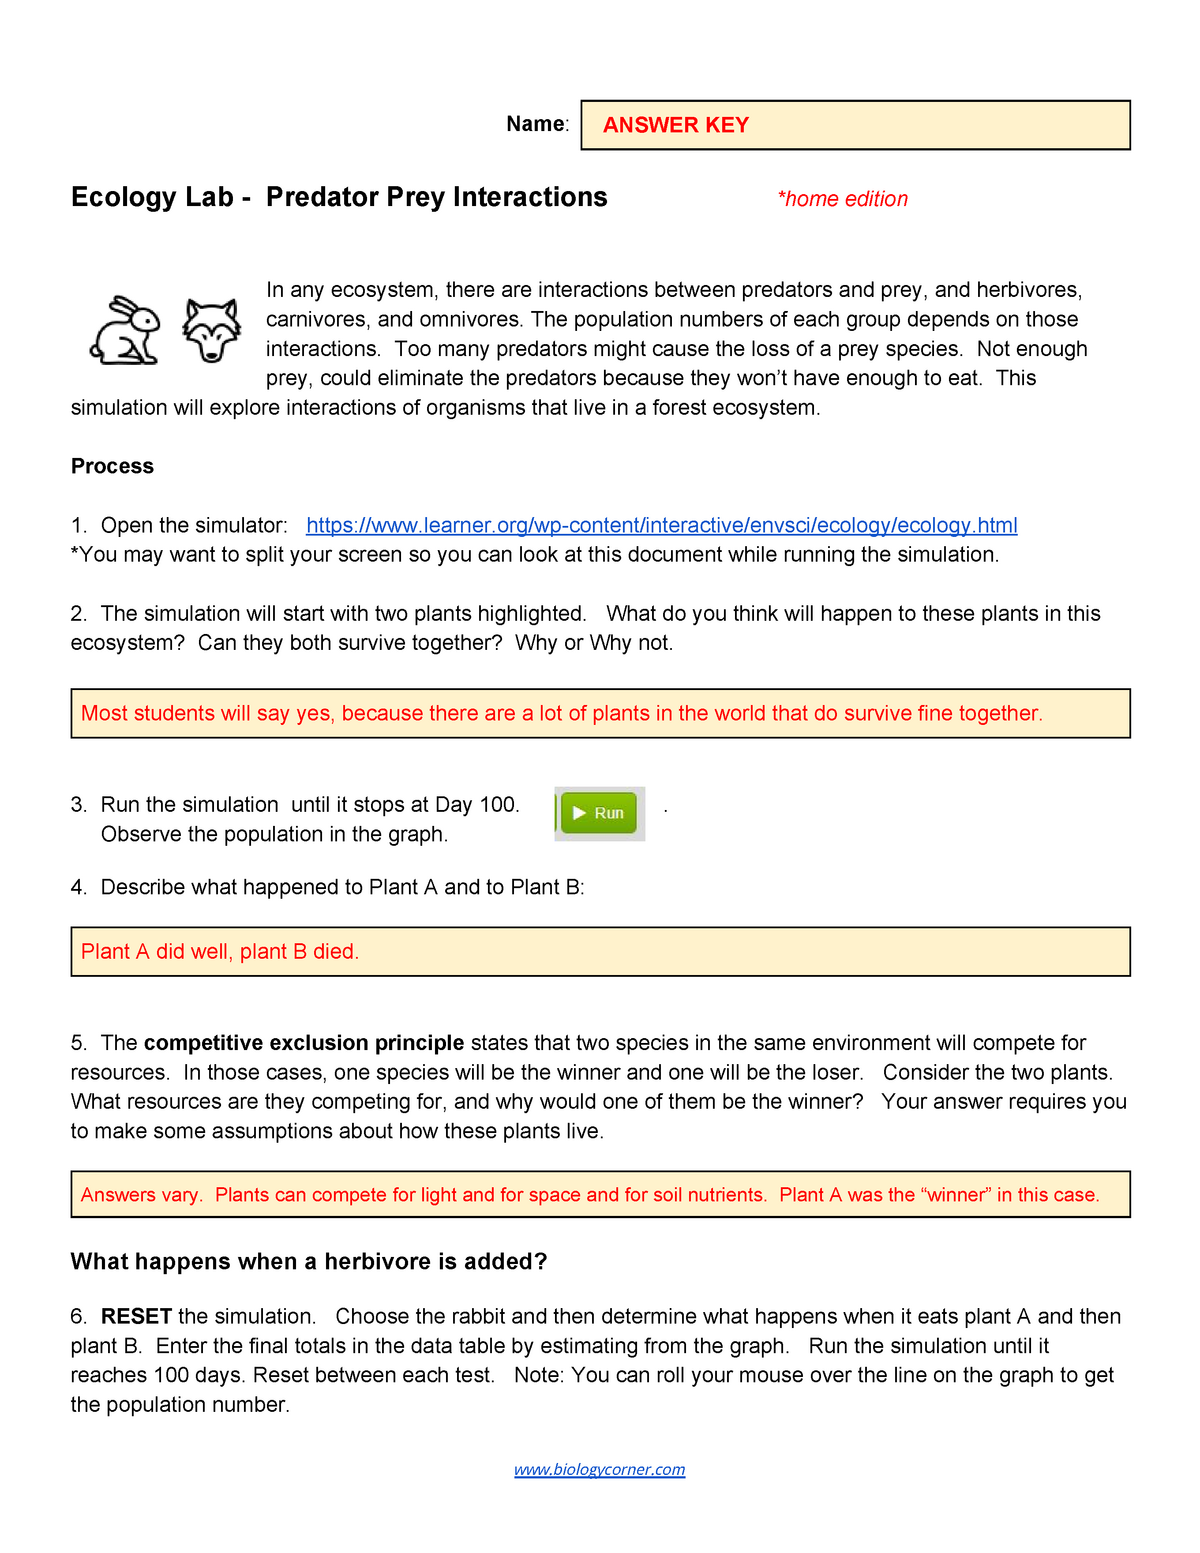 Predator Prey Interactions KEY-20 - Name ​: ANSWER KEY Ecology Lab With Ecological Relationships Worksheet Answers